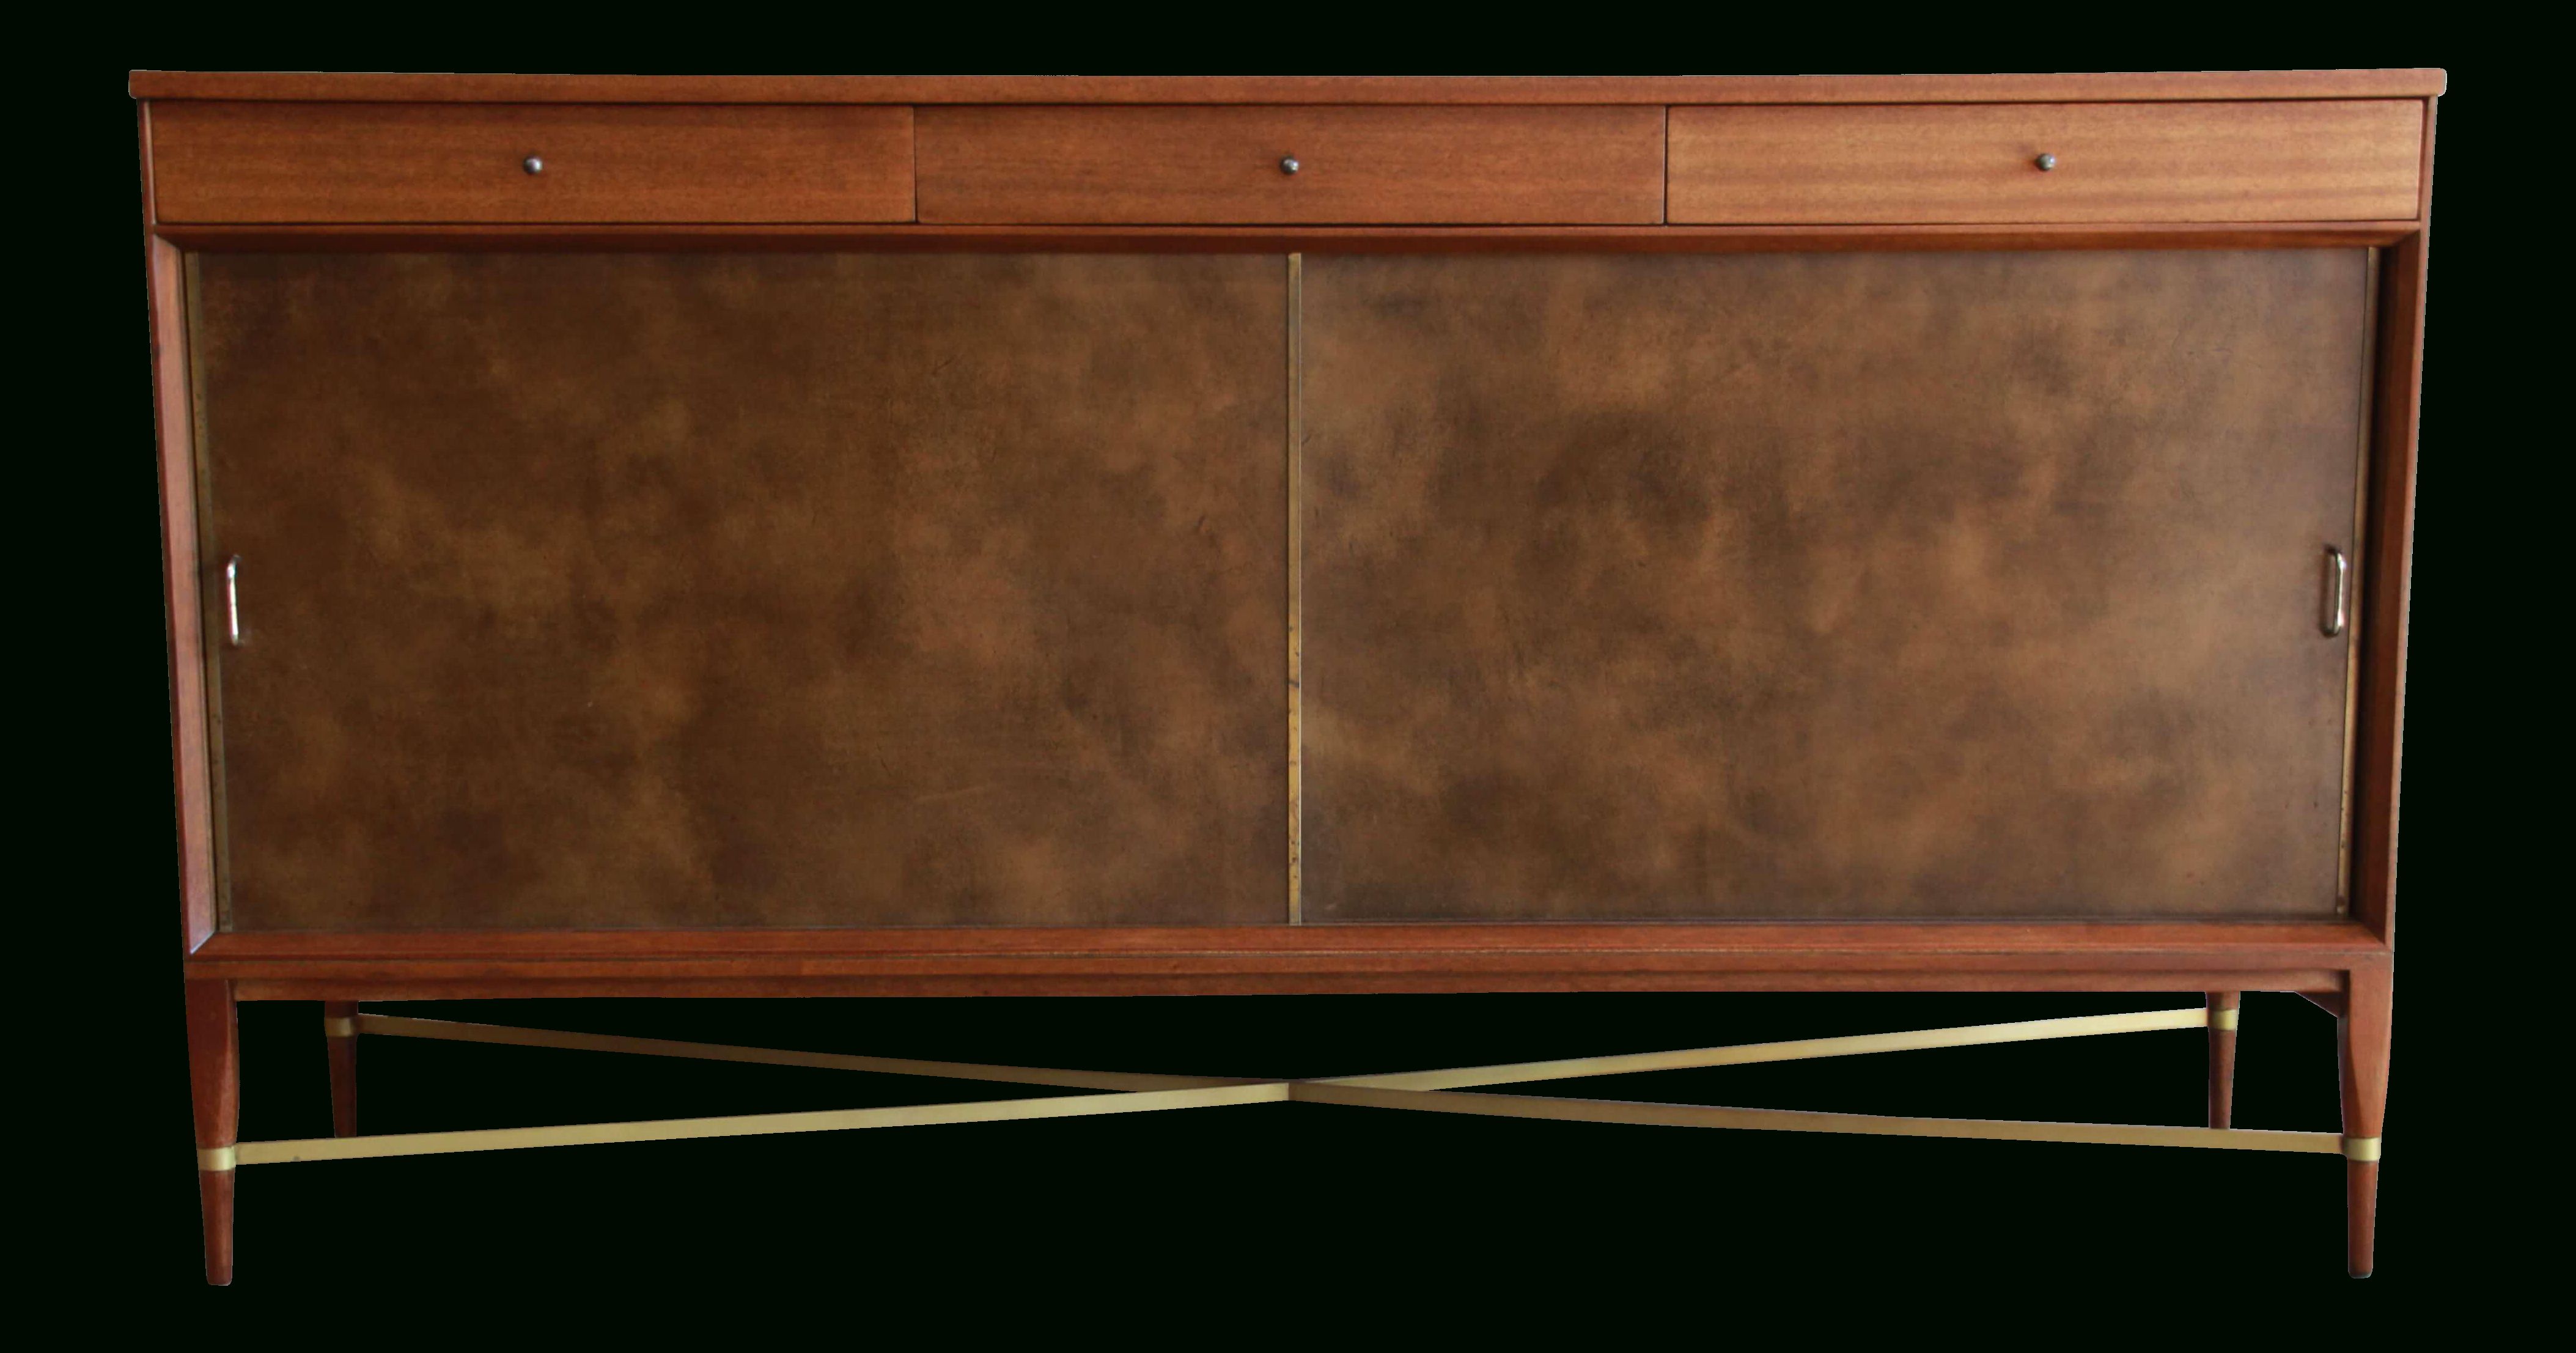 Paul Mccobb Credenza Or Sideboard For Calvin Furniture With Regard To Southwestern Credenzas (Gallery 4 of 20)